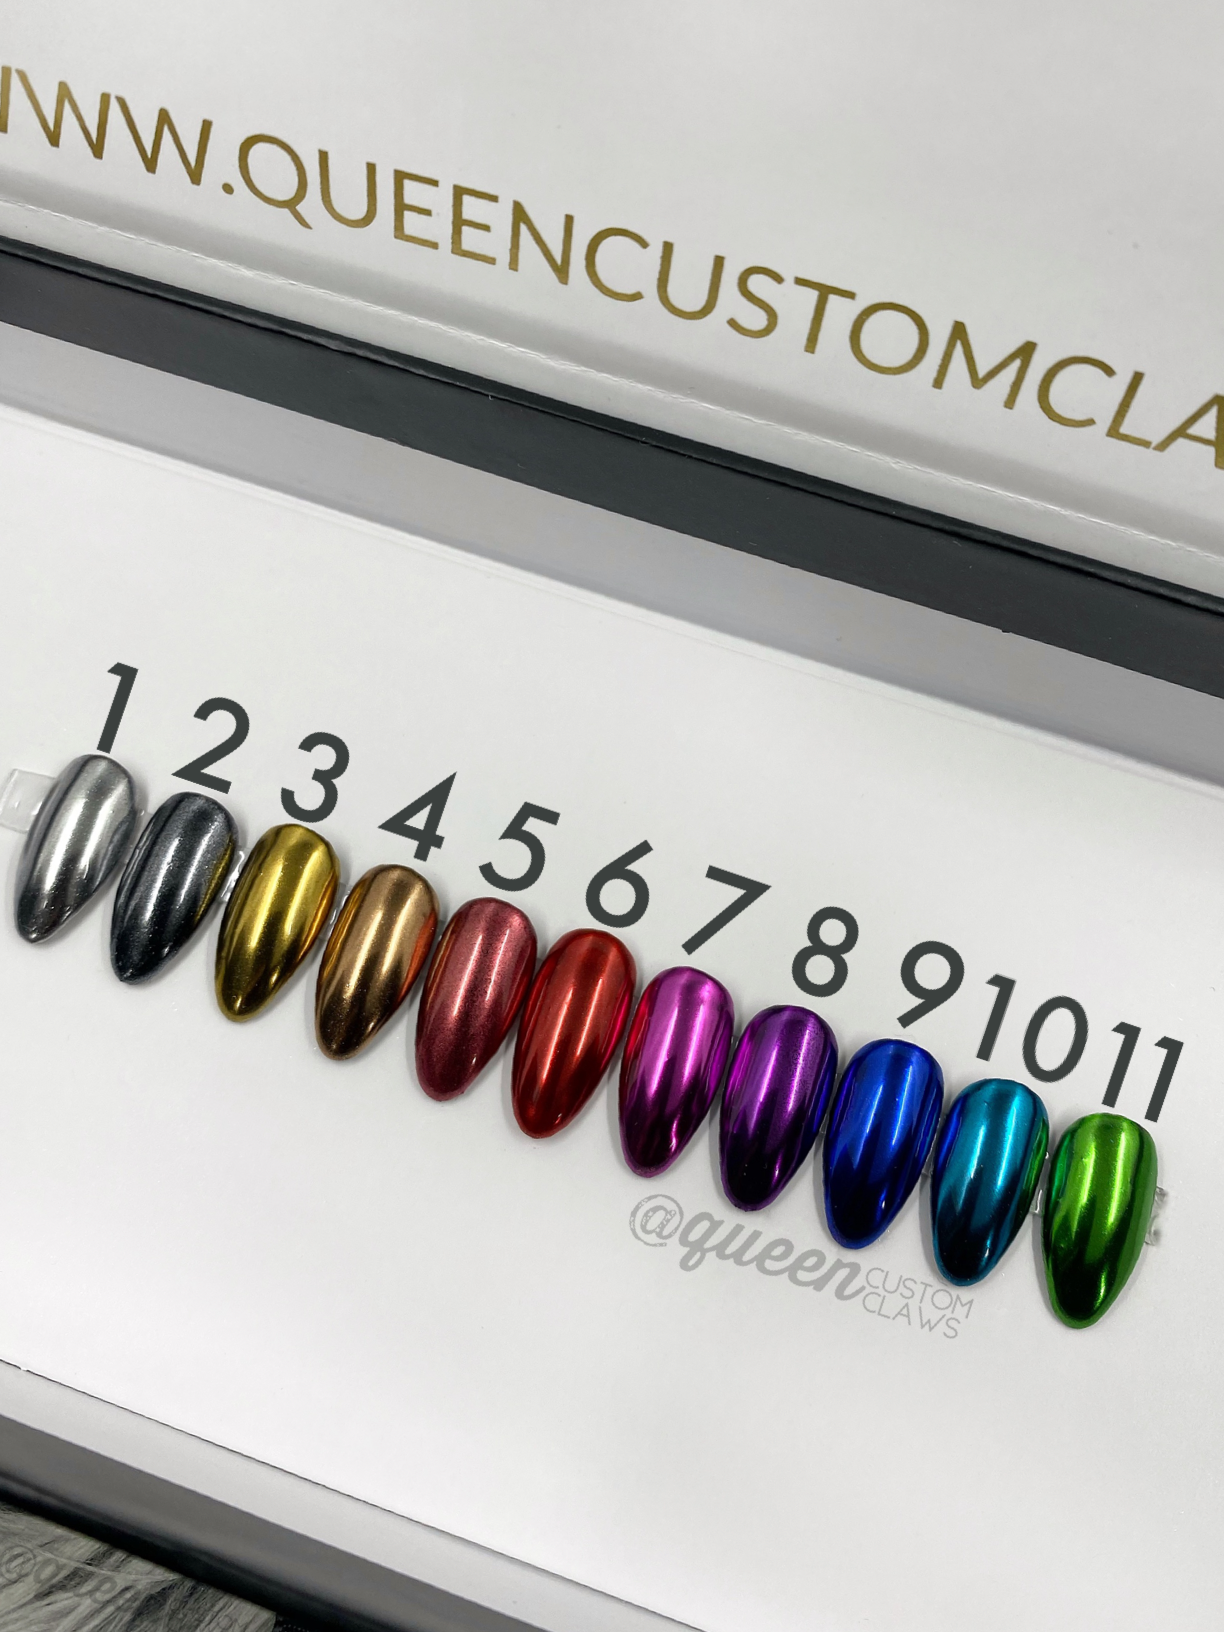 This image shows the variety of chrome colored finishes available on custom handmade press on nails. It features 11 chrome shiny chrome nail finishes. Pink chrome purple chrome blue chrome aqua teal chrome green chrome silver chrome gold chrome nails